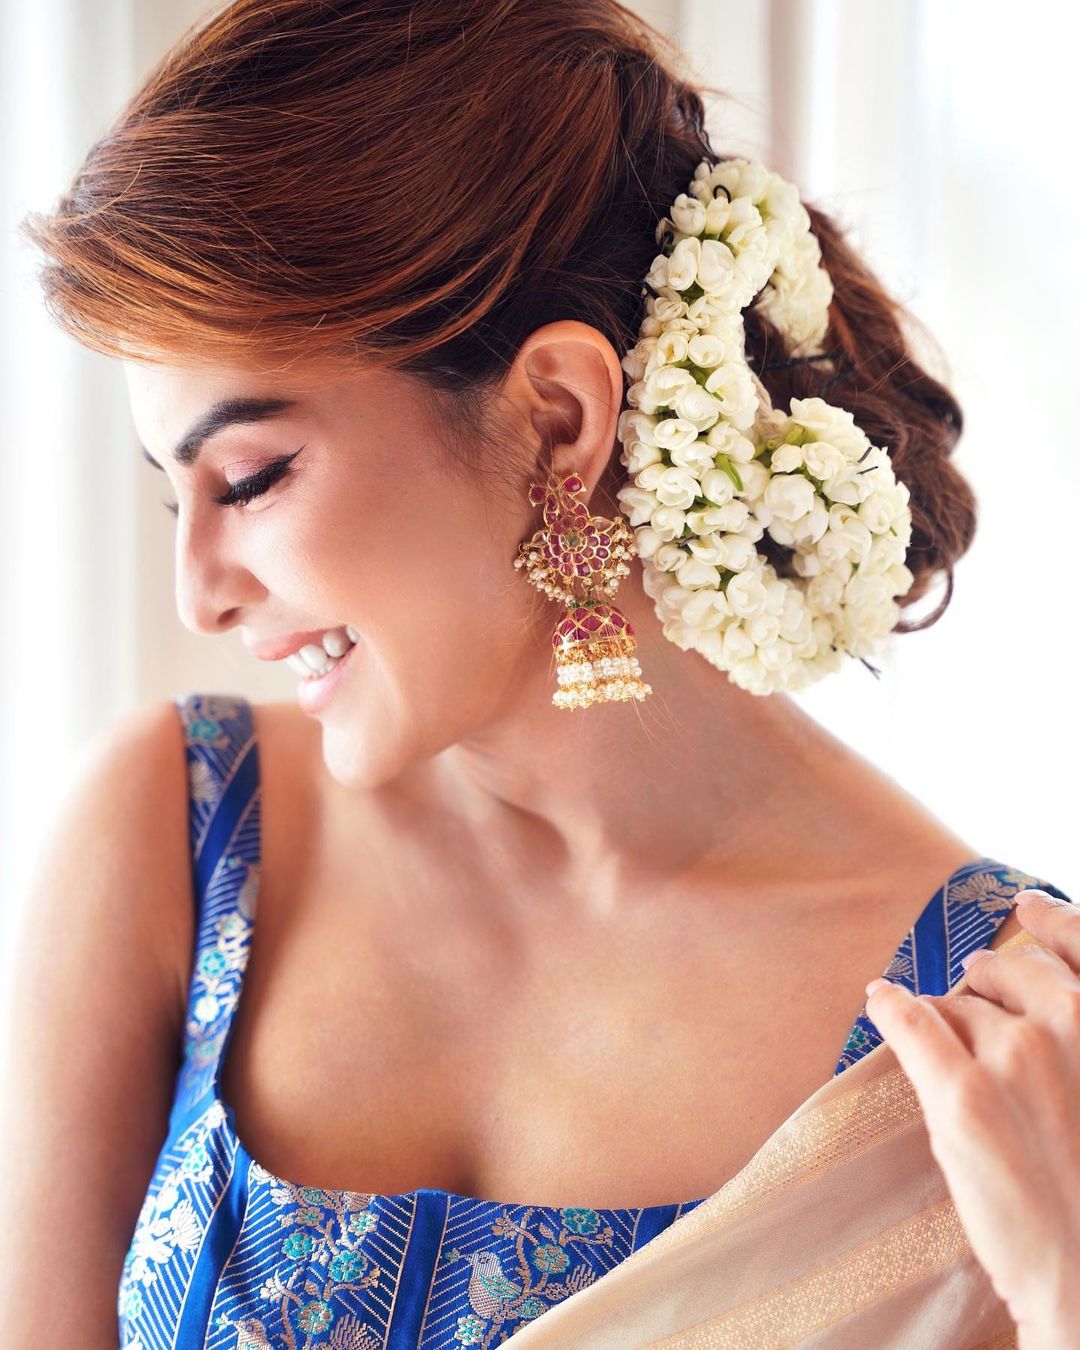 Jacqueline Fernandez stuns with the fresh flowers adorning her hair and traditional jhumkas